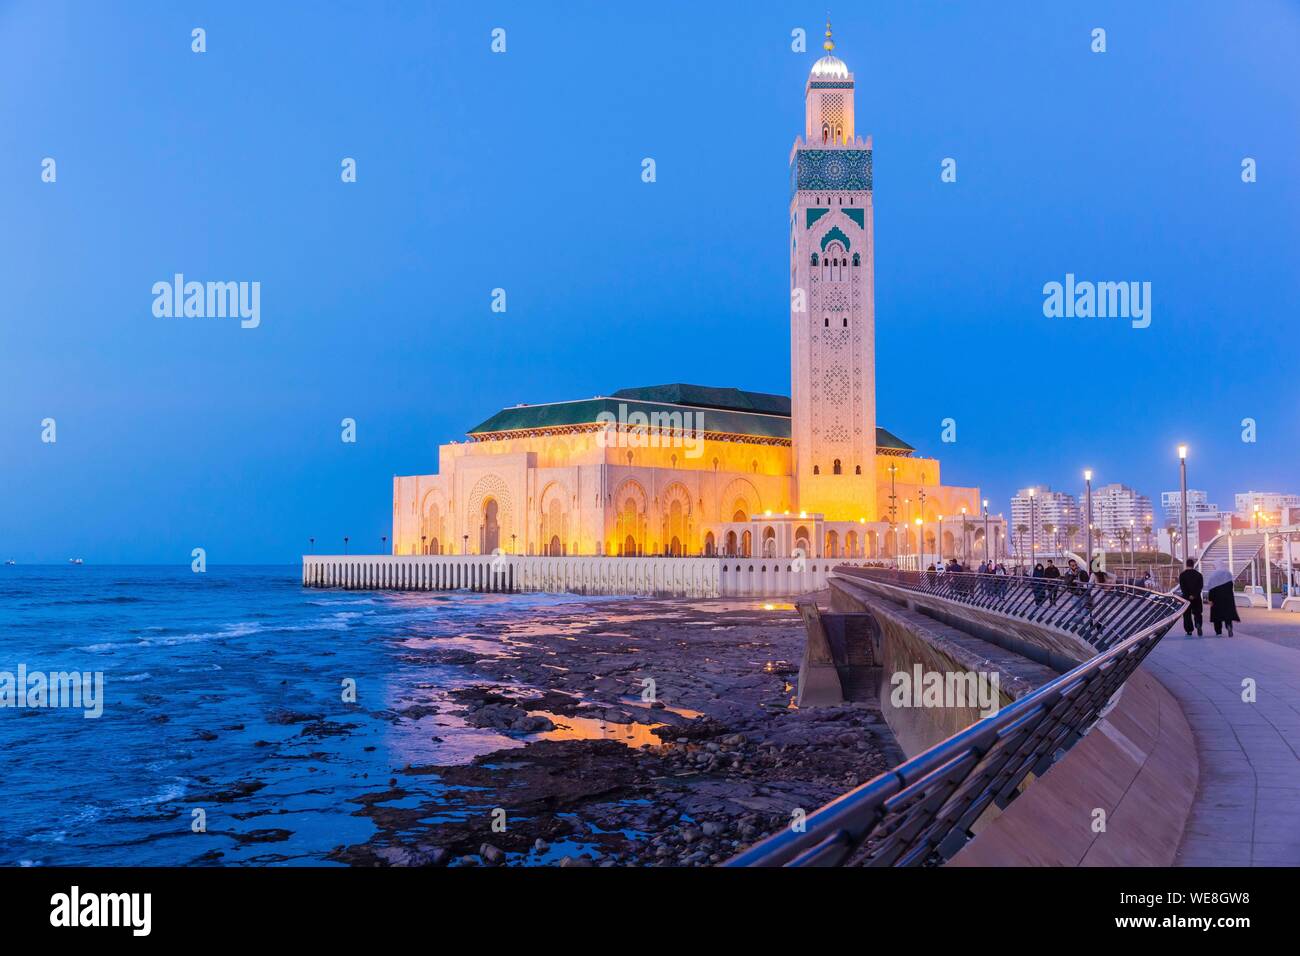 Morocco, Casablanca, the forecourt of the Hassan II mosque Stock Photo